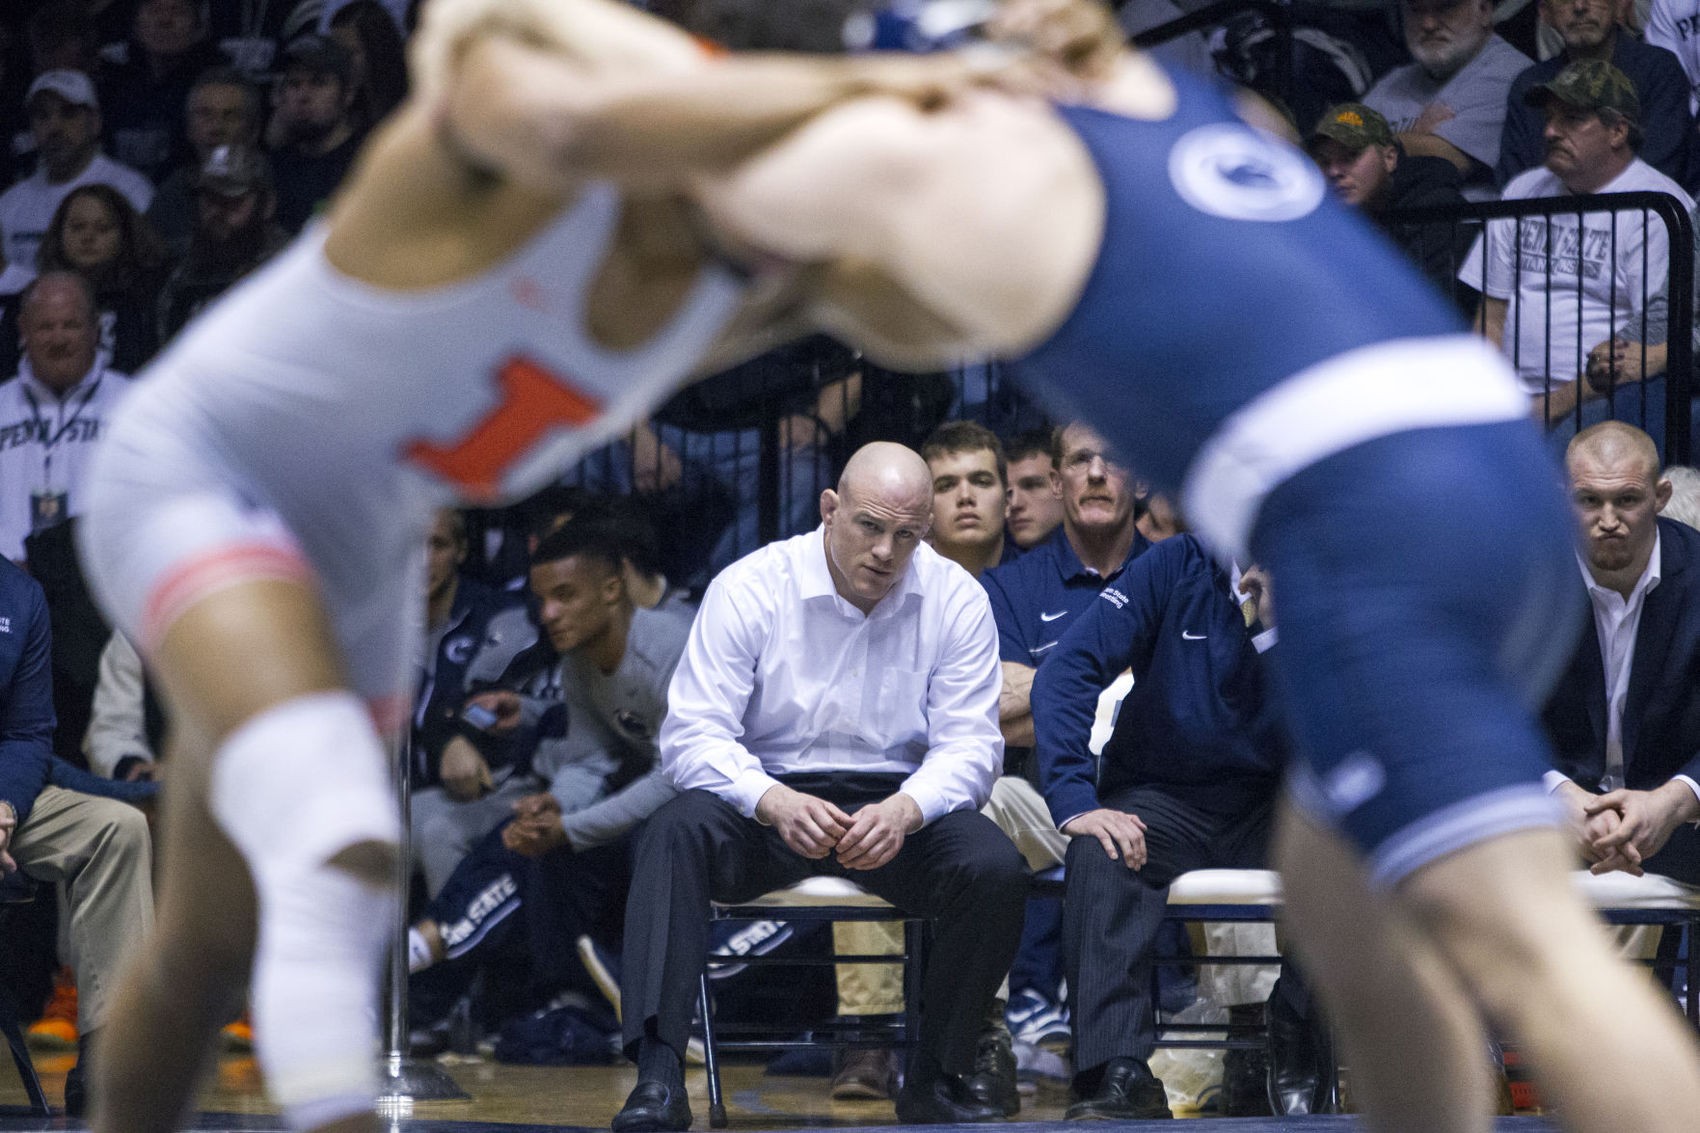 Penn State wrestling's newest starter impresses while another